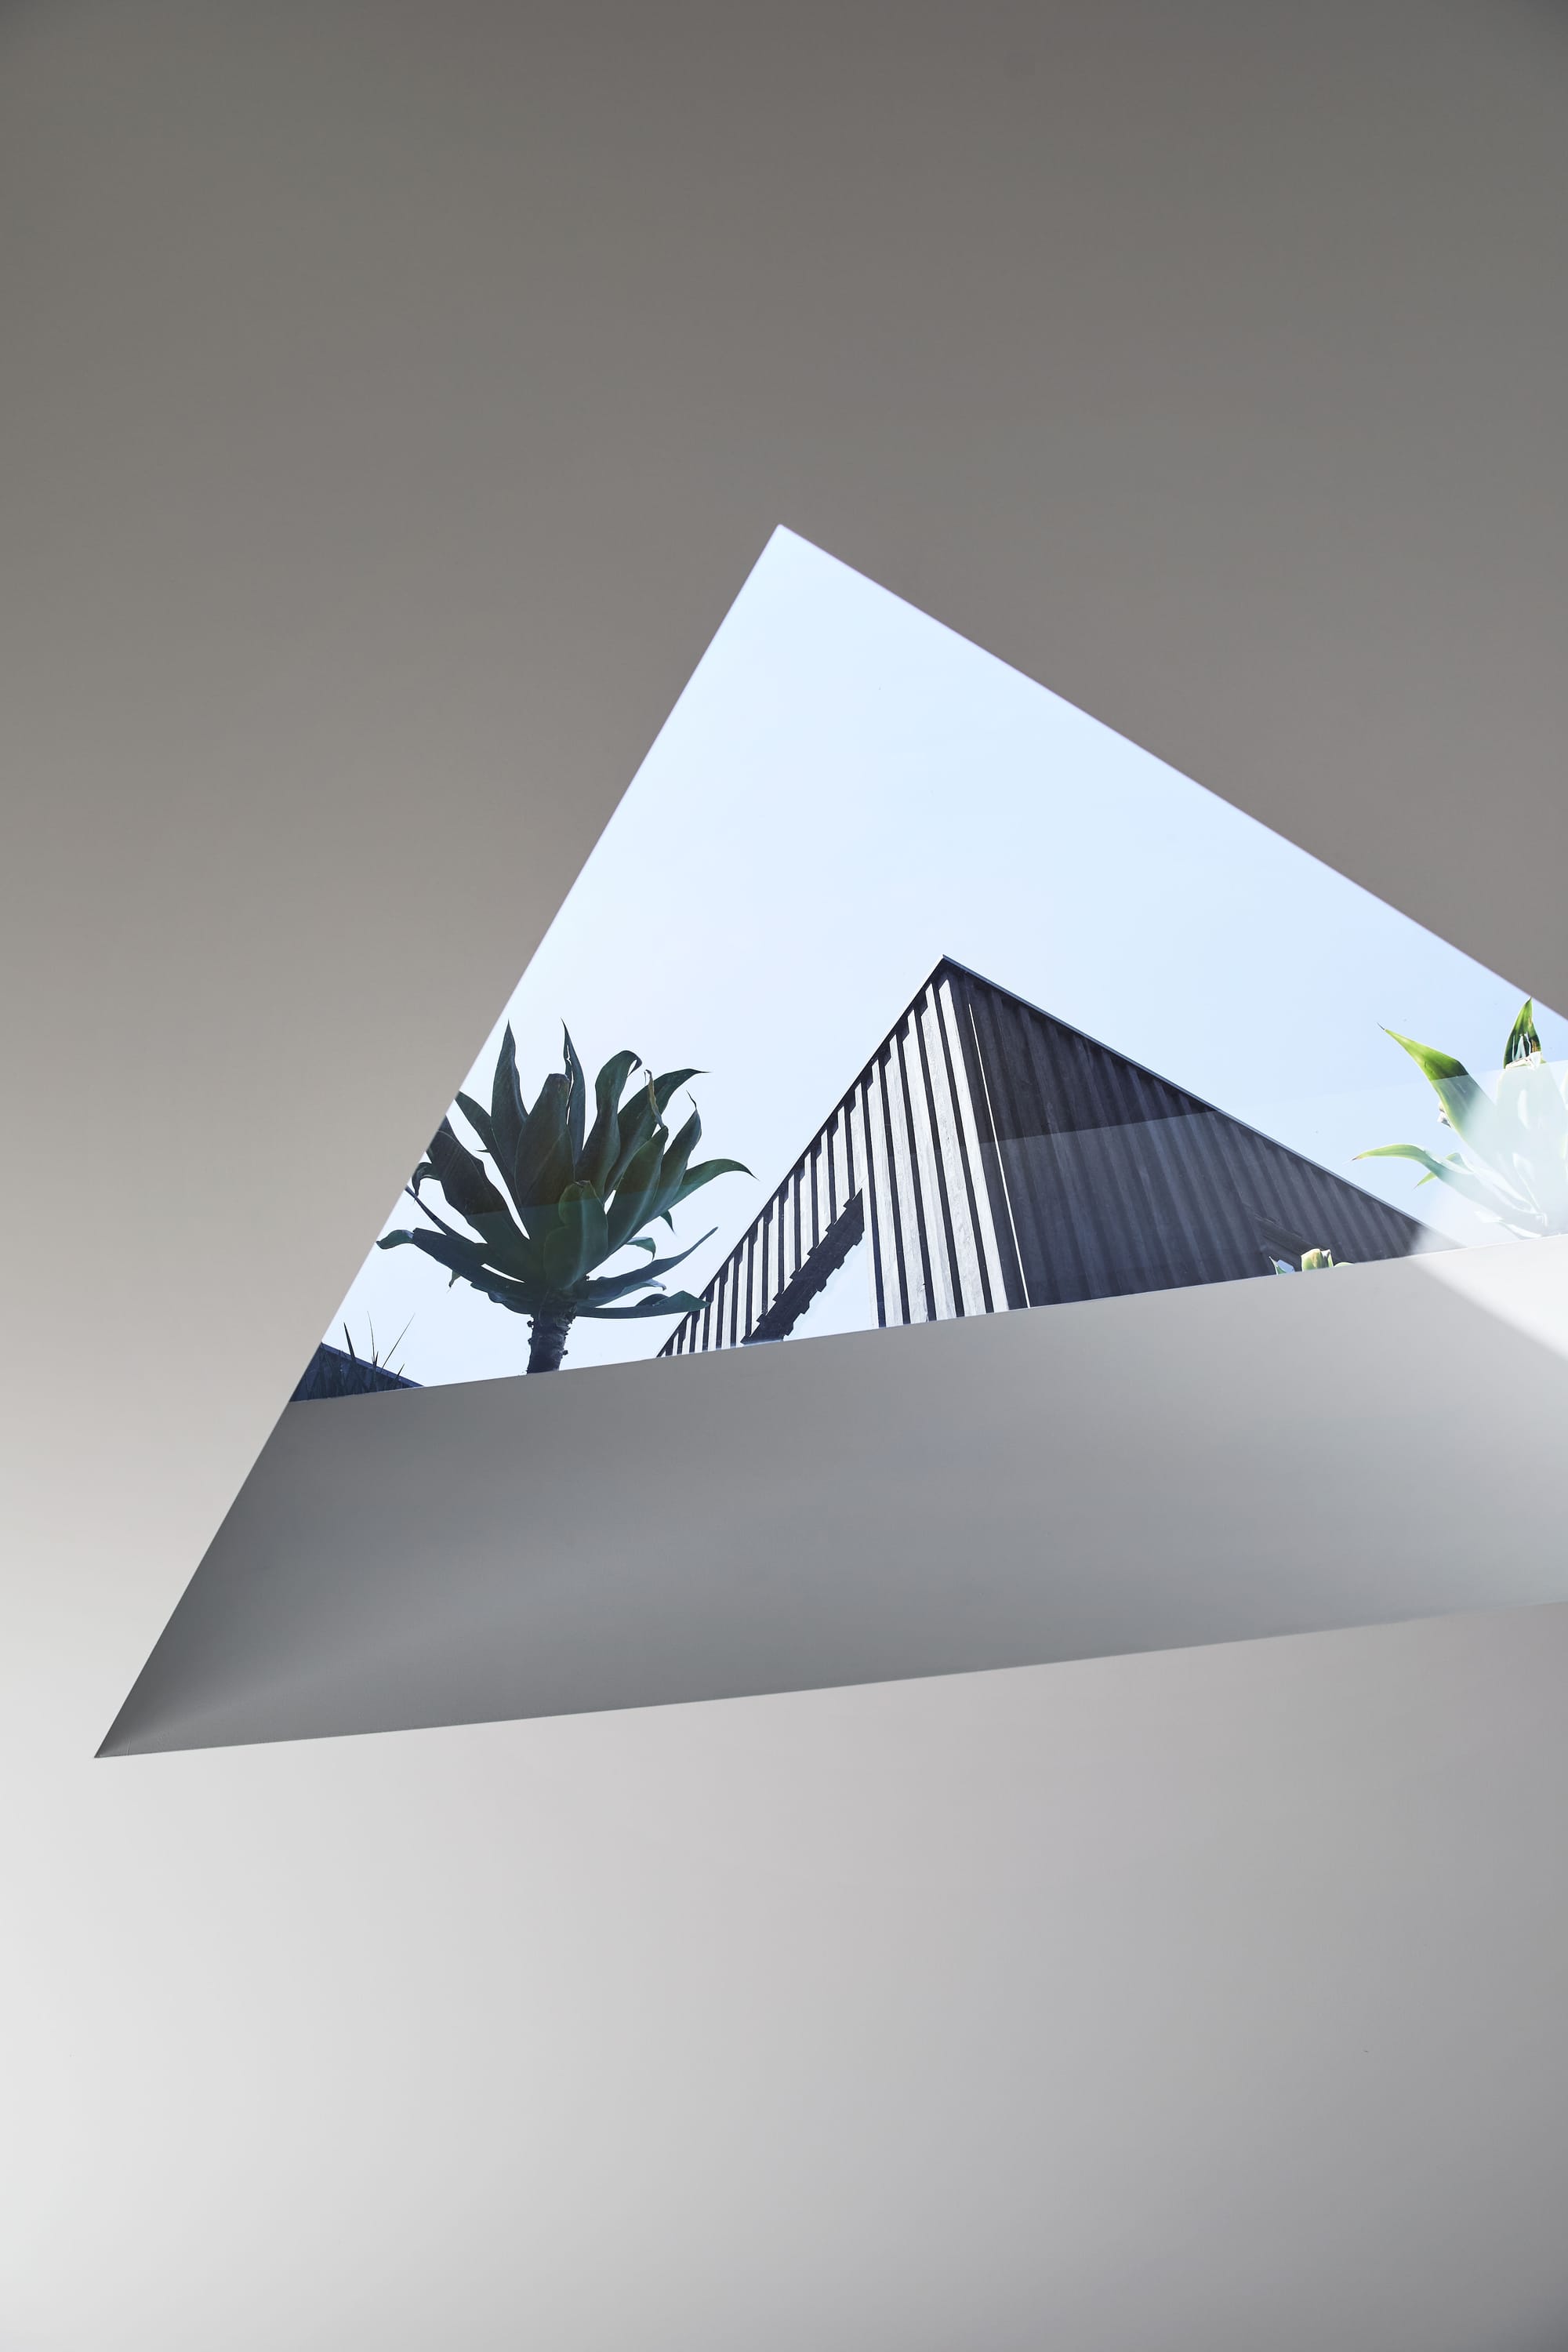 The Split Home by Seidler Group. Copyright of Seidler Group. Triangular skylight in white ceiling framing black metal second storey of home outside. Succulents visible through skylight. 